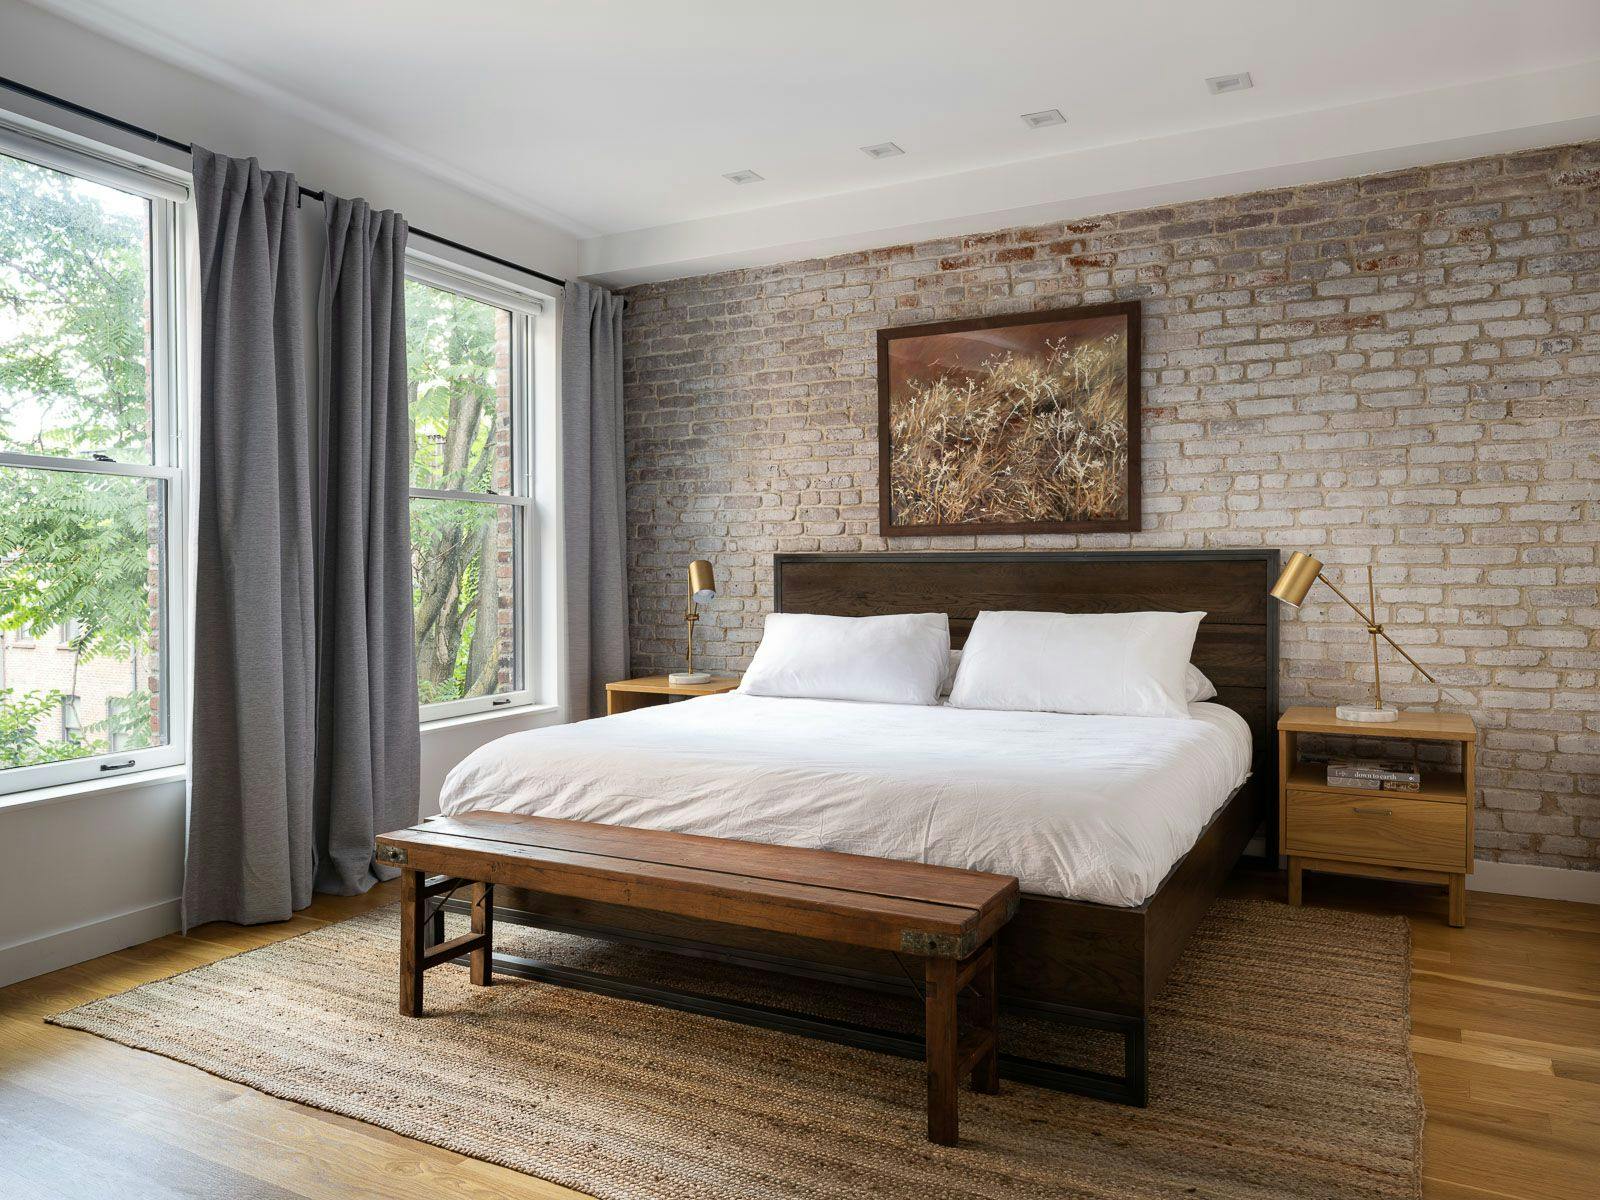 Bed in Brick Accent Wall Bedroom with 2 large sunlit windows